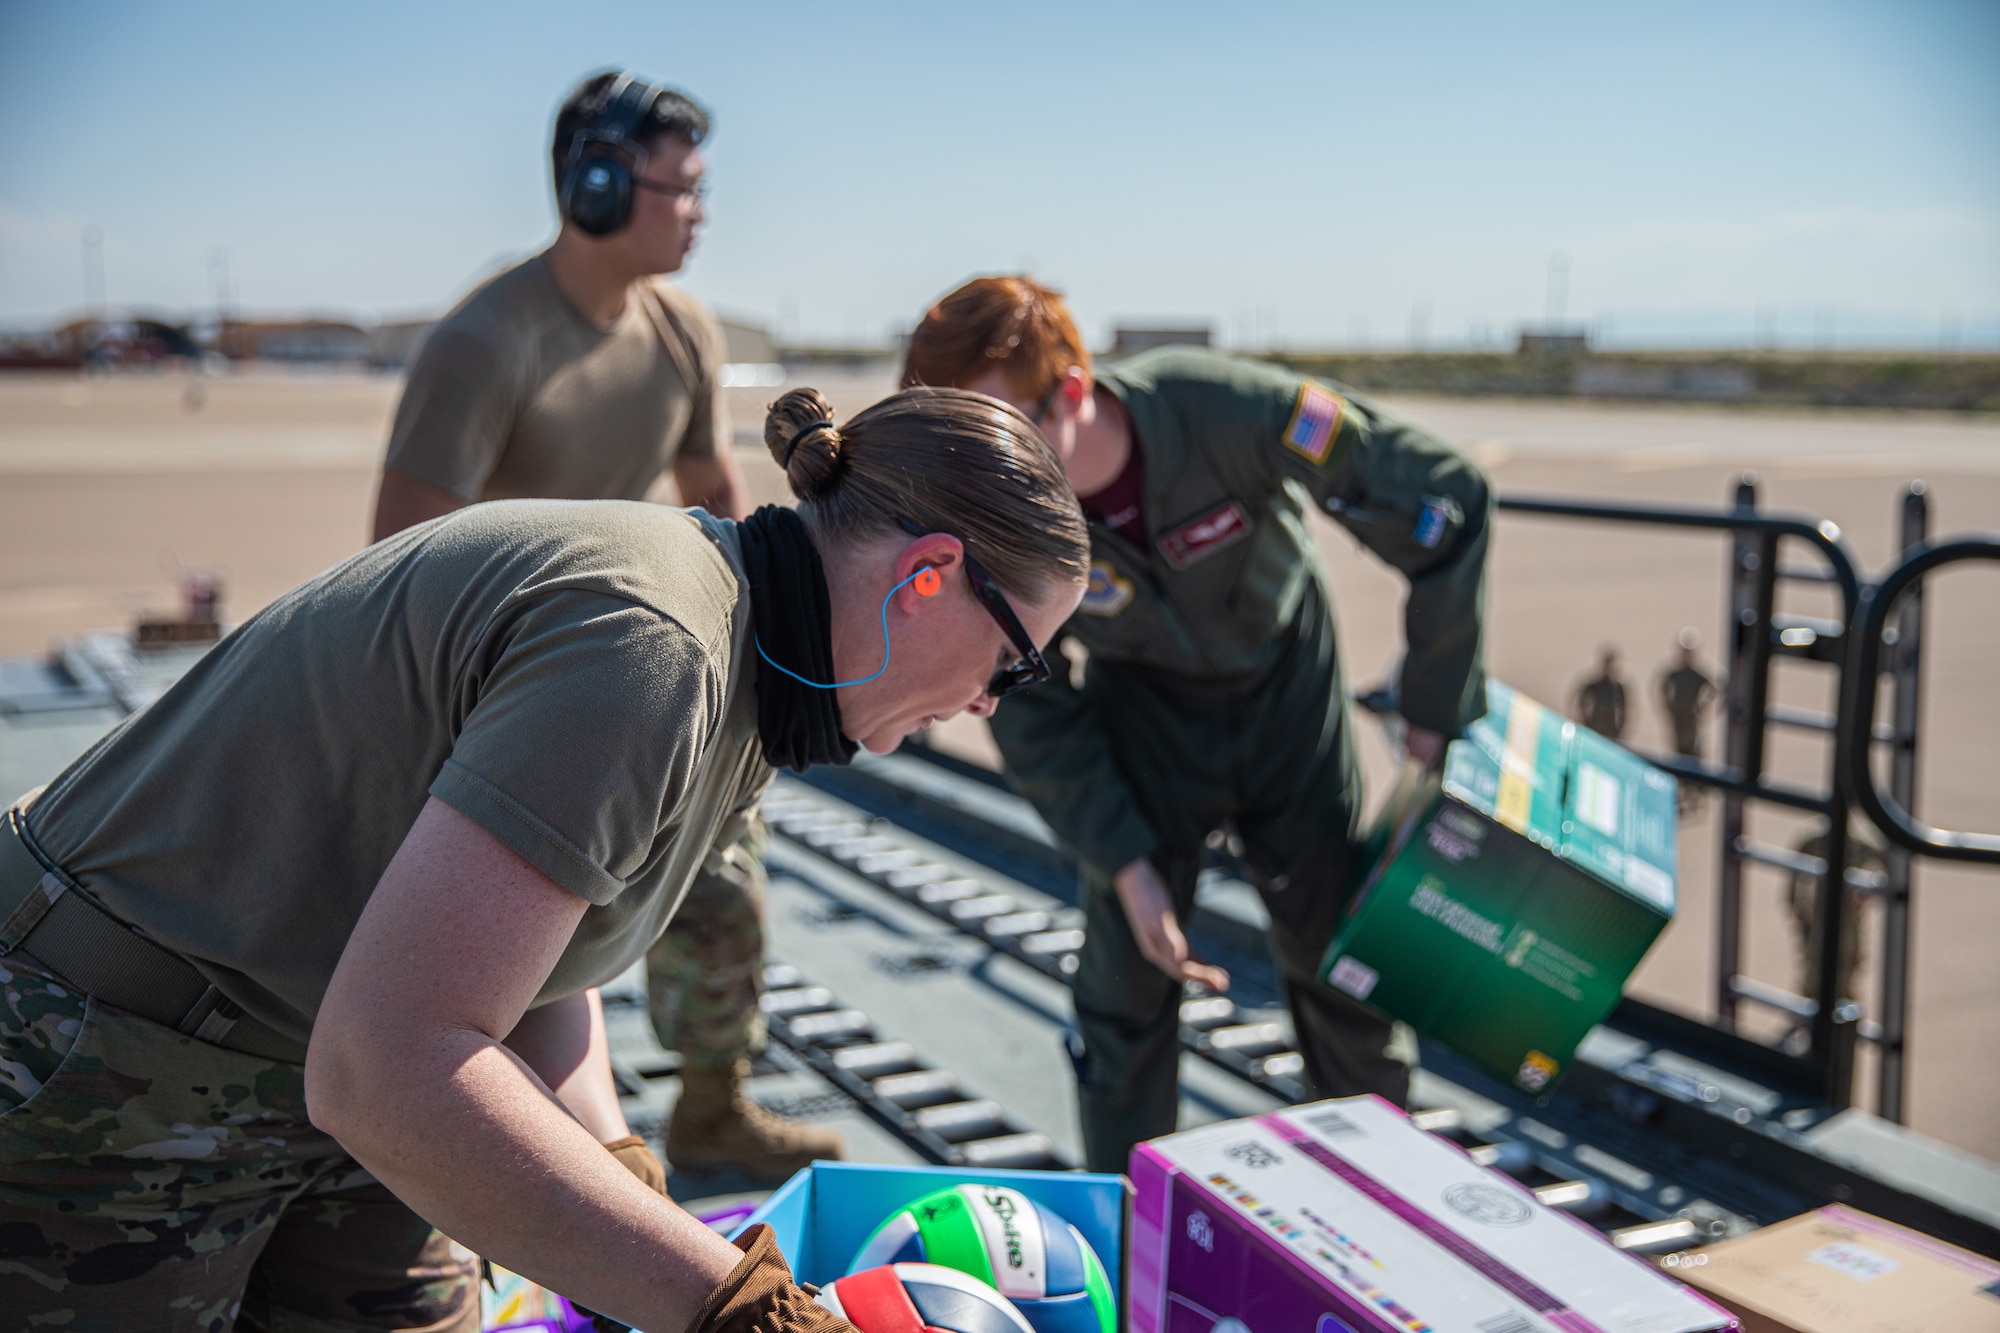 Airmen from Fairchild Air Force Base, Washington, unload donations off a KC-135 Stratotanker in support of Operation Allies Welcome on Holloman Air Force Base, New Mexico, Sept. 17, 2021.The Department of Defense, through U.S. Northern Command, and in support of the Department of State and Department of Homeland Security, is providing transportation, temporary housing, medical screening, and general support for at least 50,000 Afghan evacuees at suitable facilities, in permanent or temporary structures, as quickly as possible. This initiative provides Afghan evacuees essential support at secure locations outside Afghanistan. (U.S. Army photo by Pfc. Anthony Sanchez)